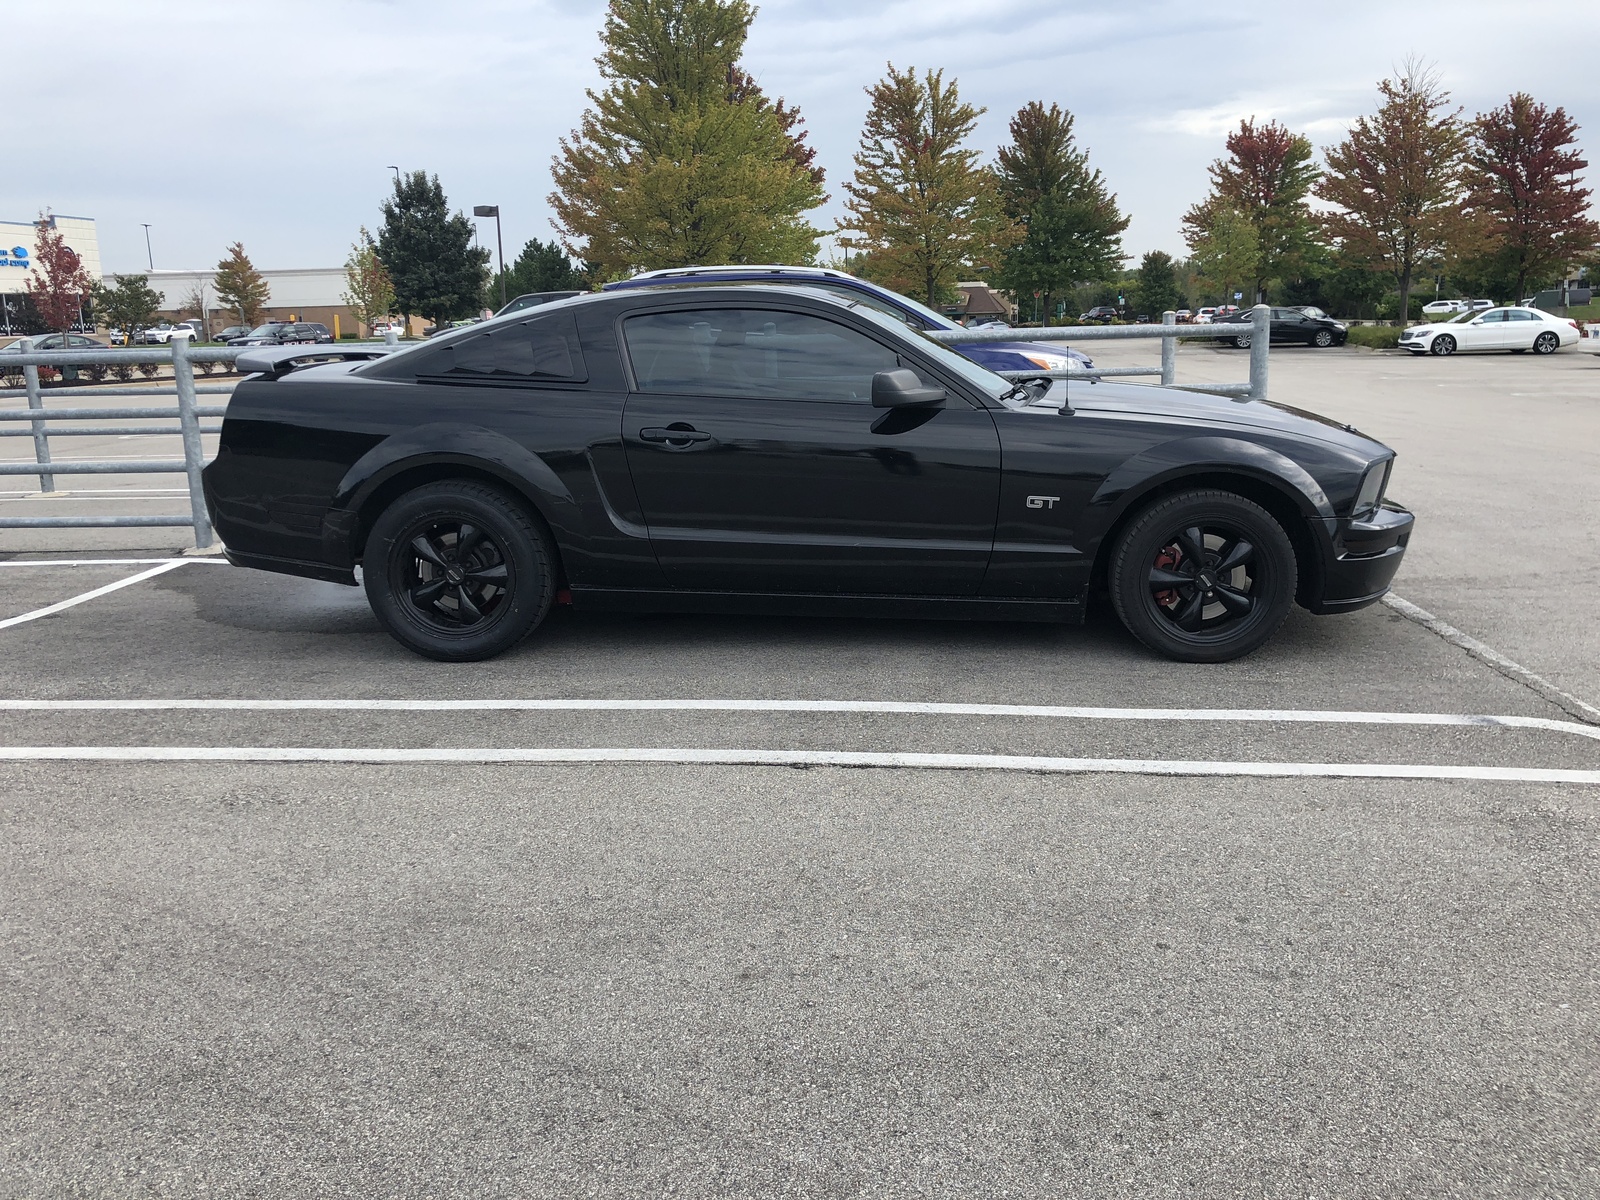 Black 2006 Ford Mustang